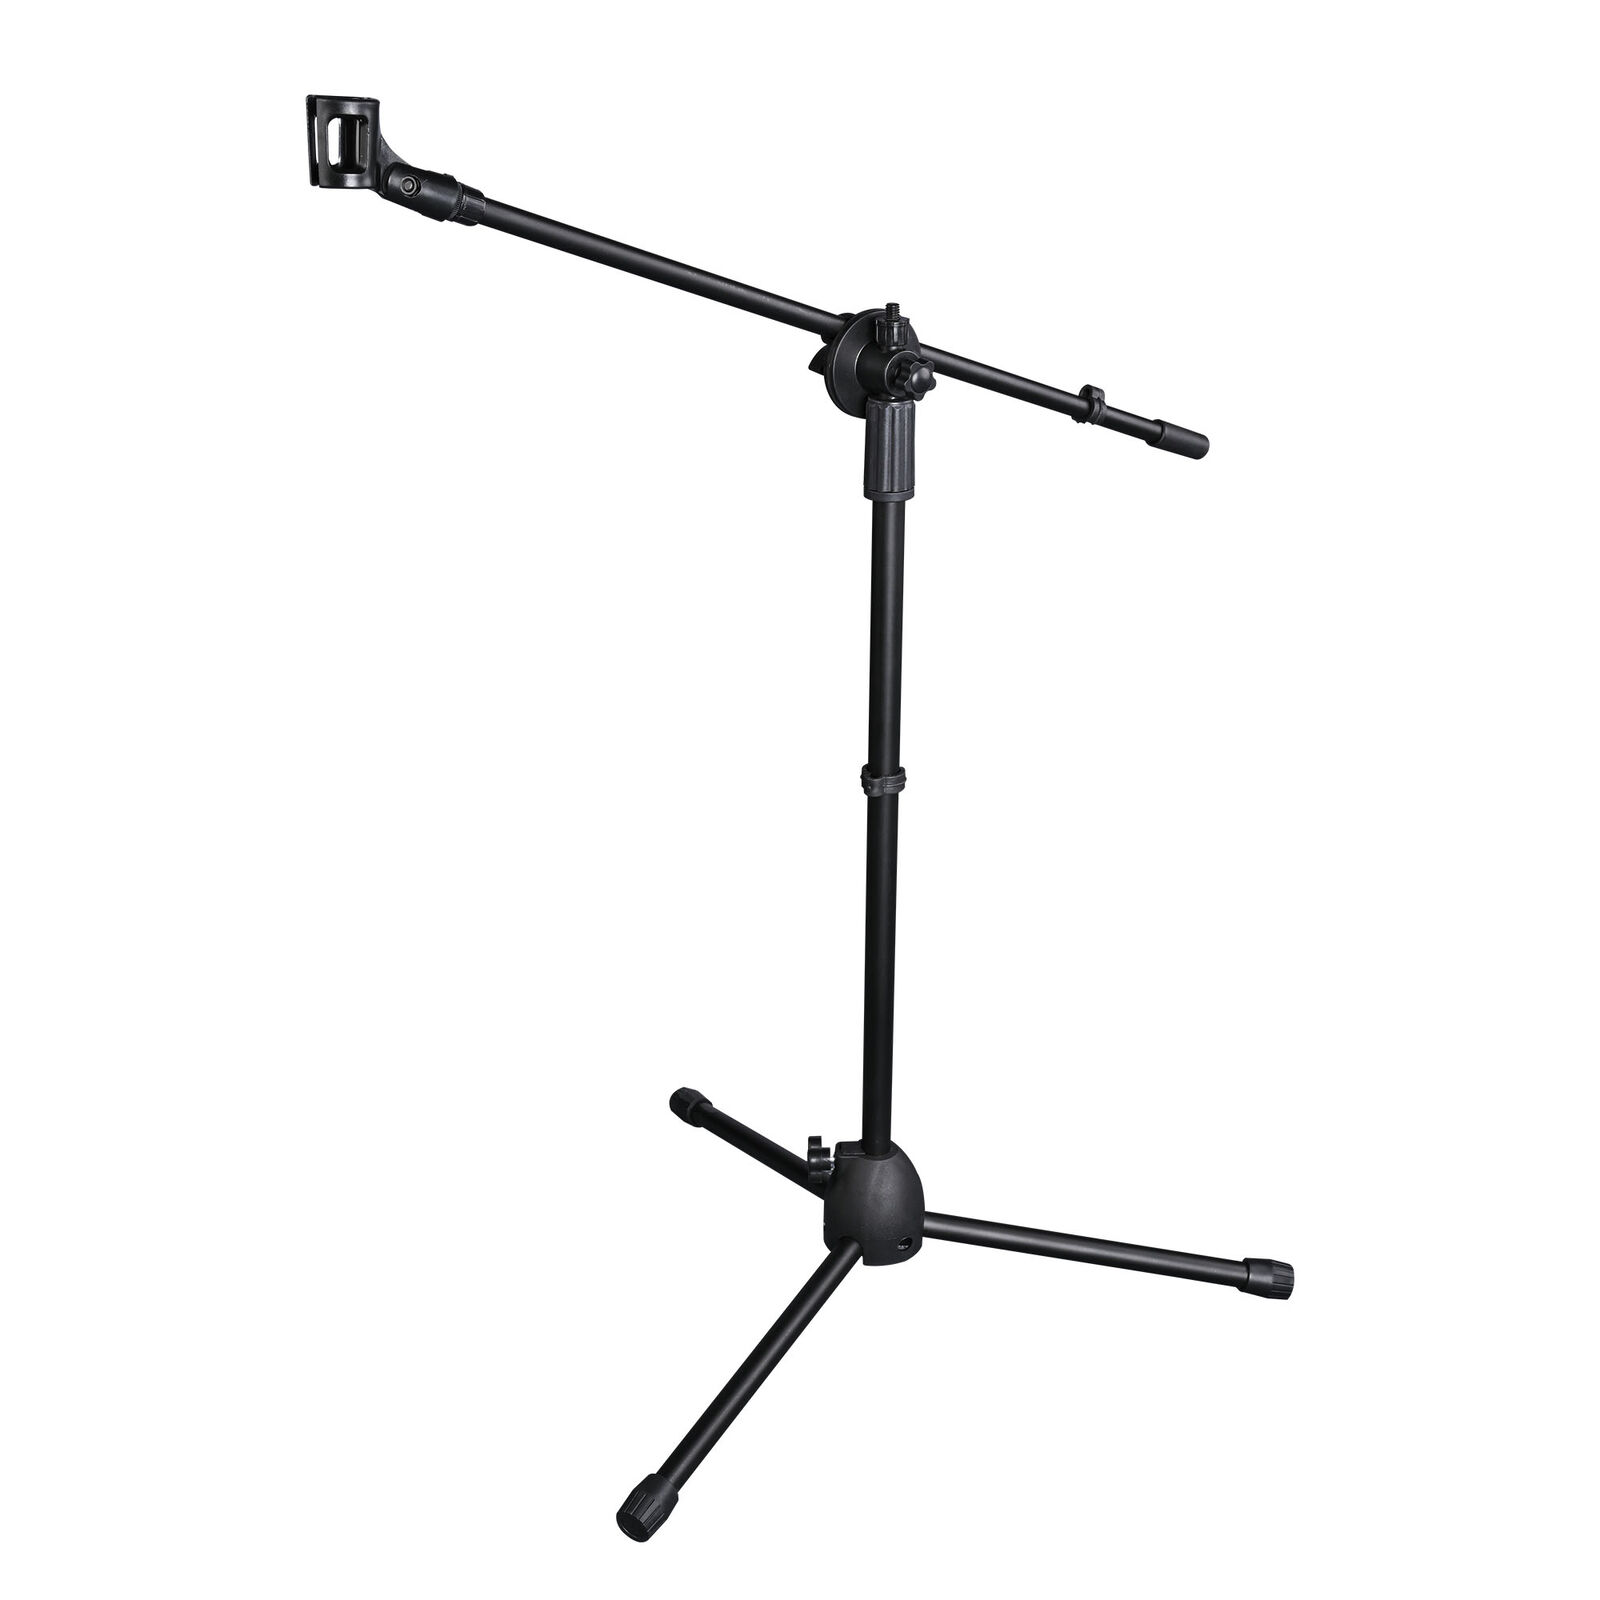 Microphone Stand Clip 90-degree Stage Studio Holder Boom Arm Foldable Tripod